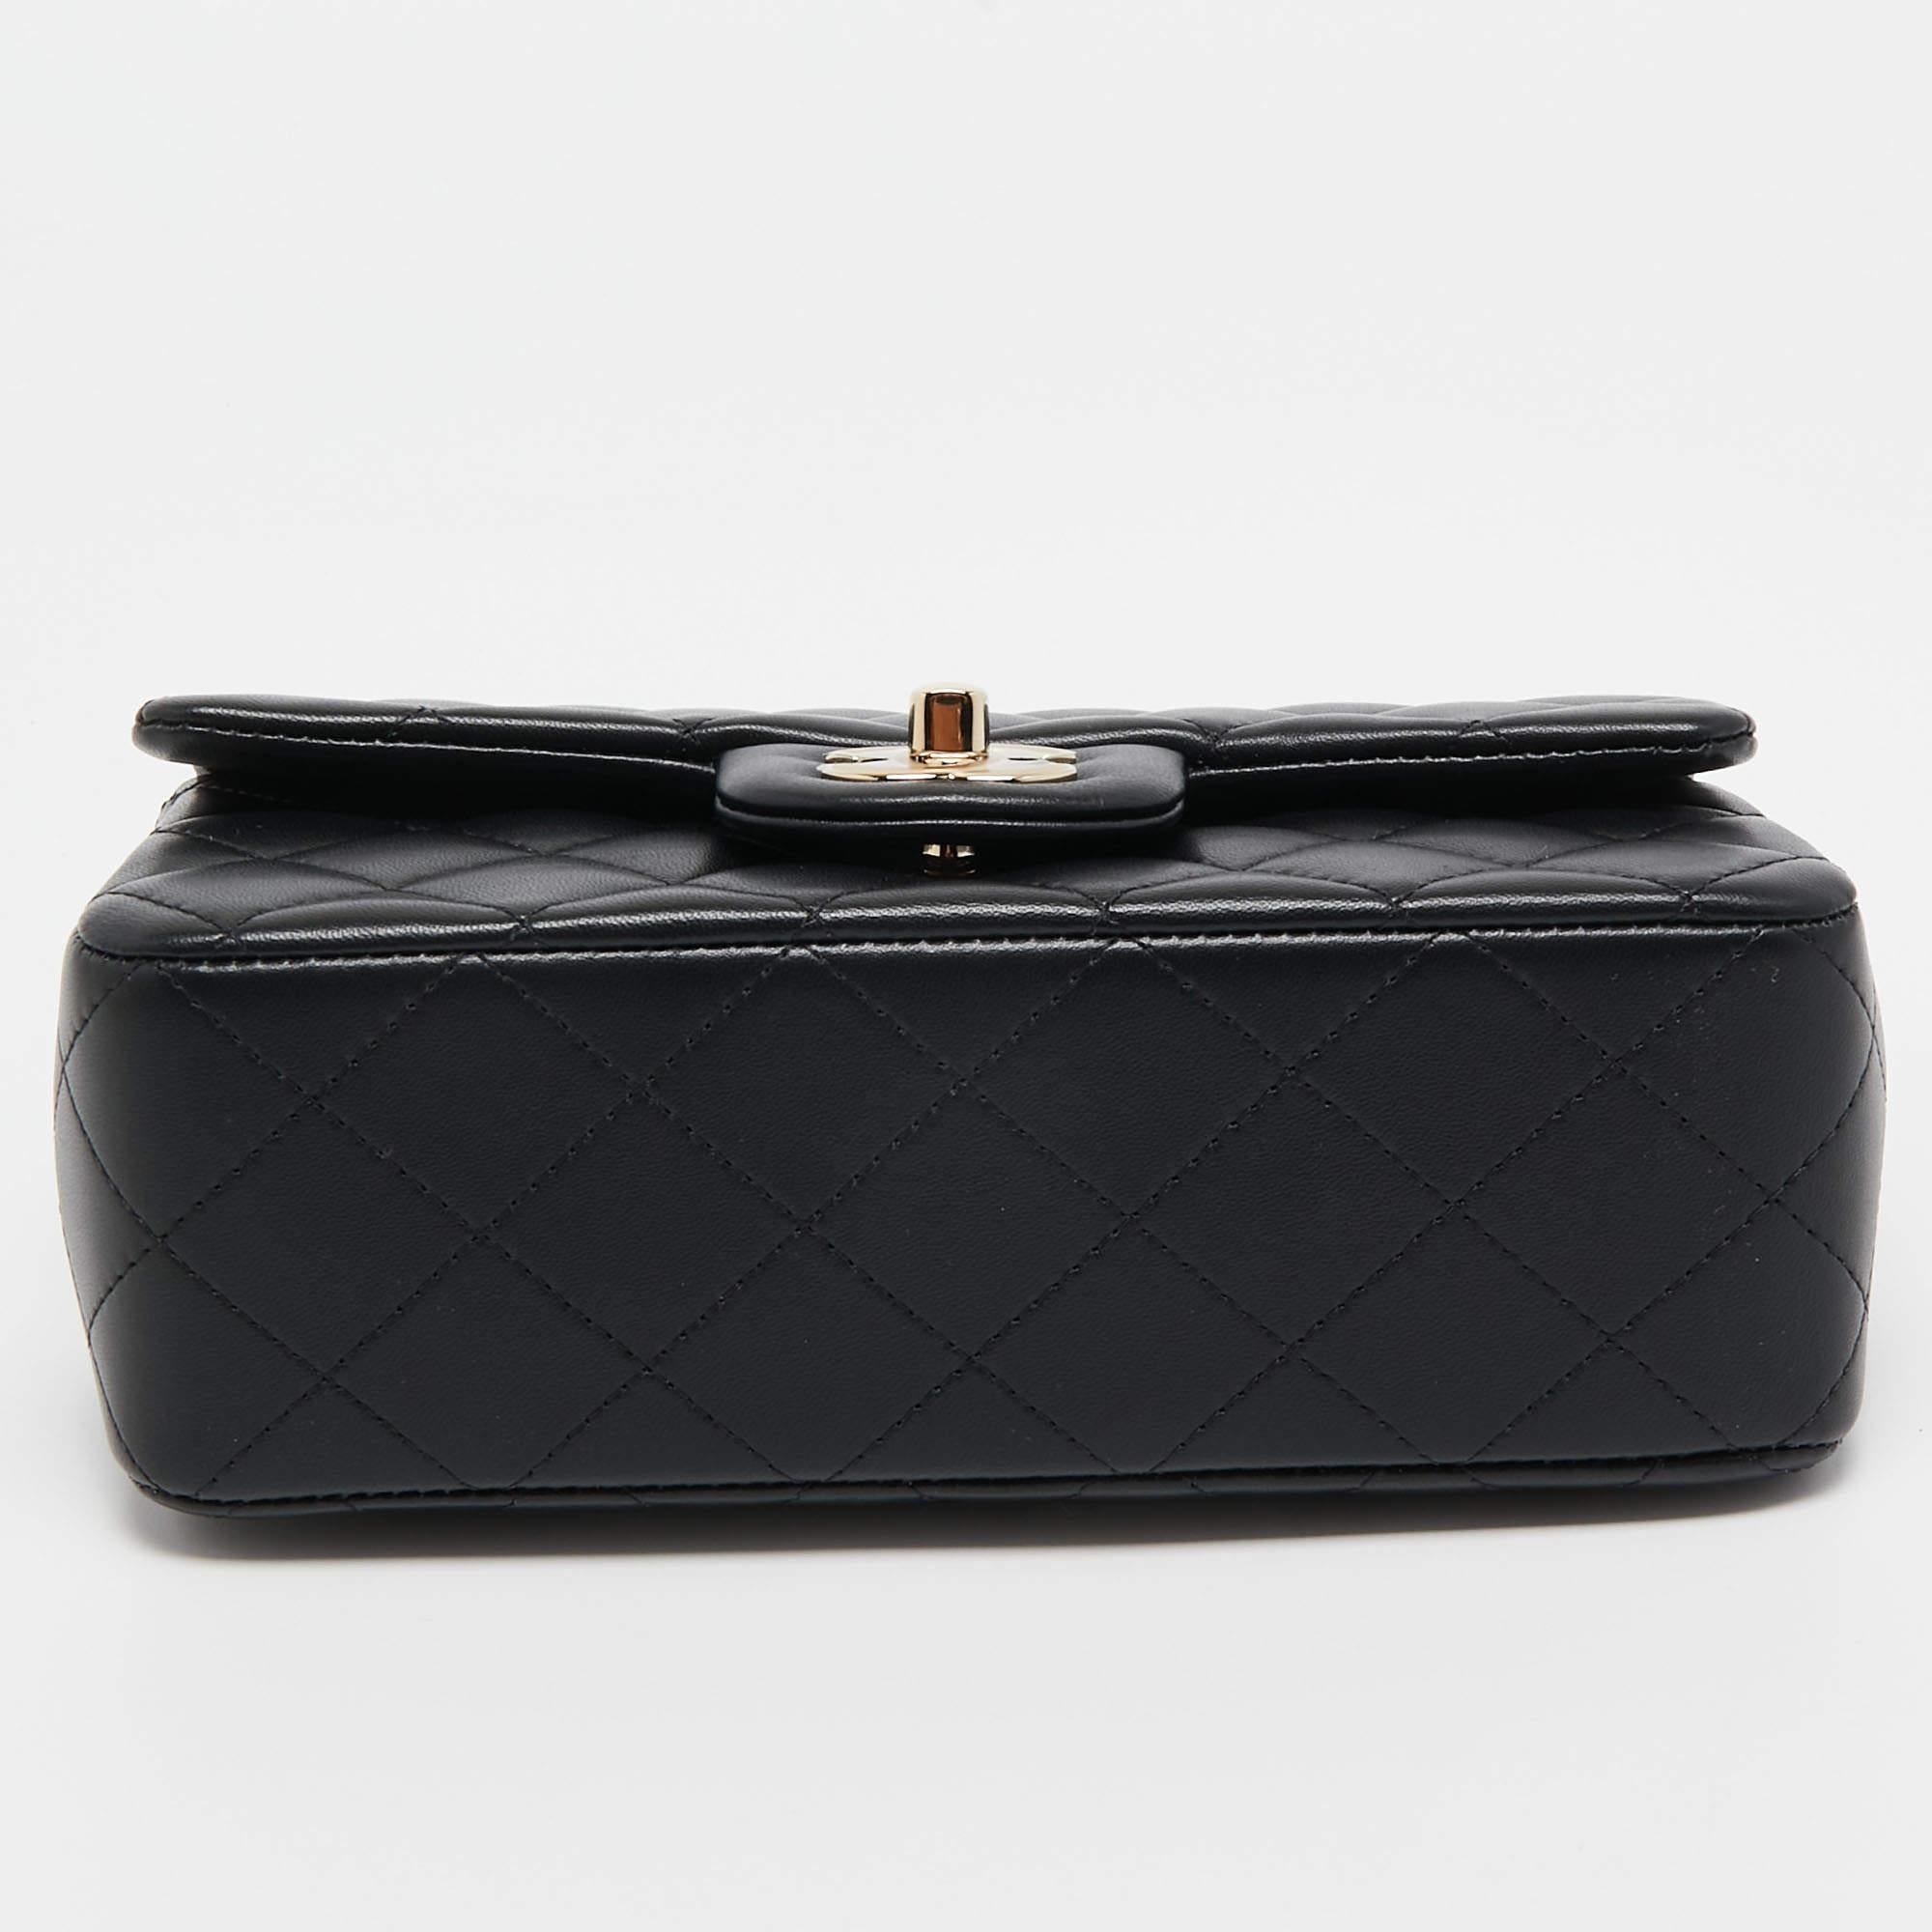 Chanel Black Quilted Leather Mini Rectangular Top Handle Bag 3